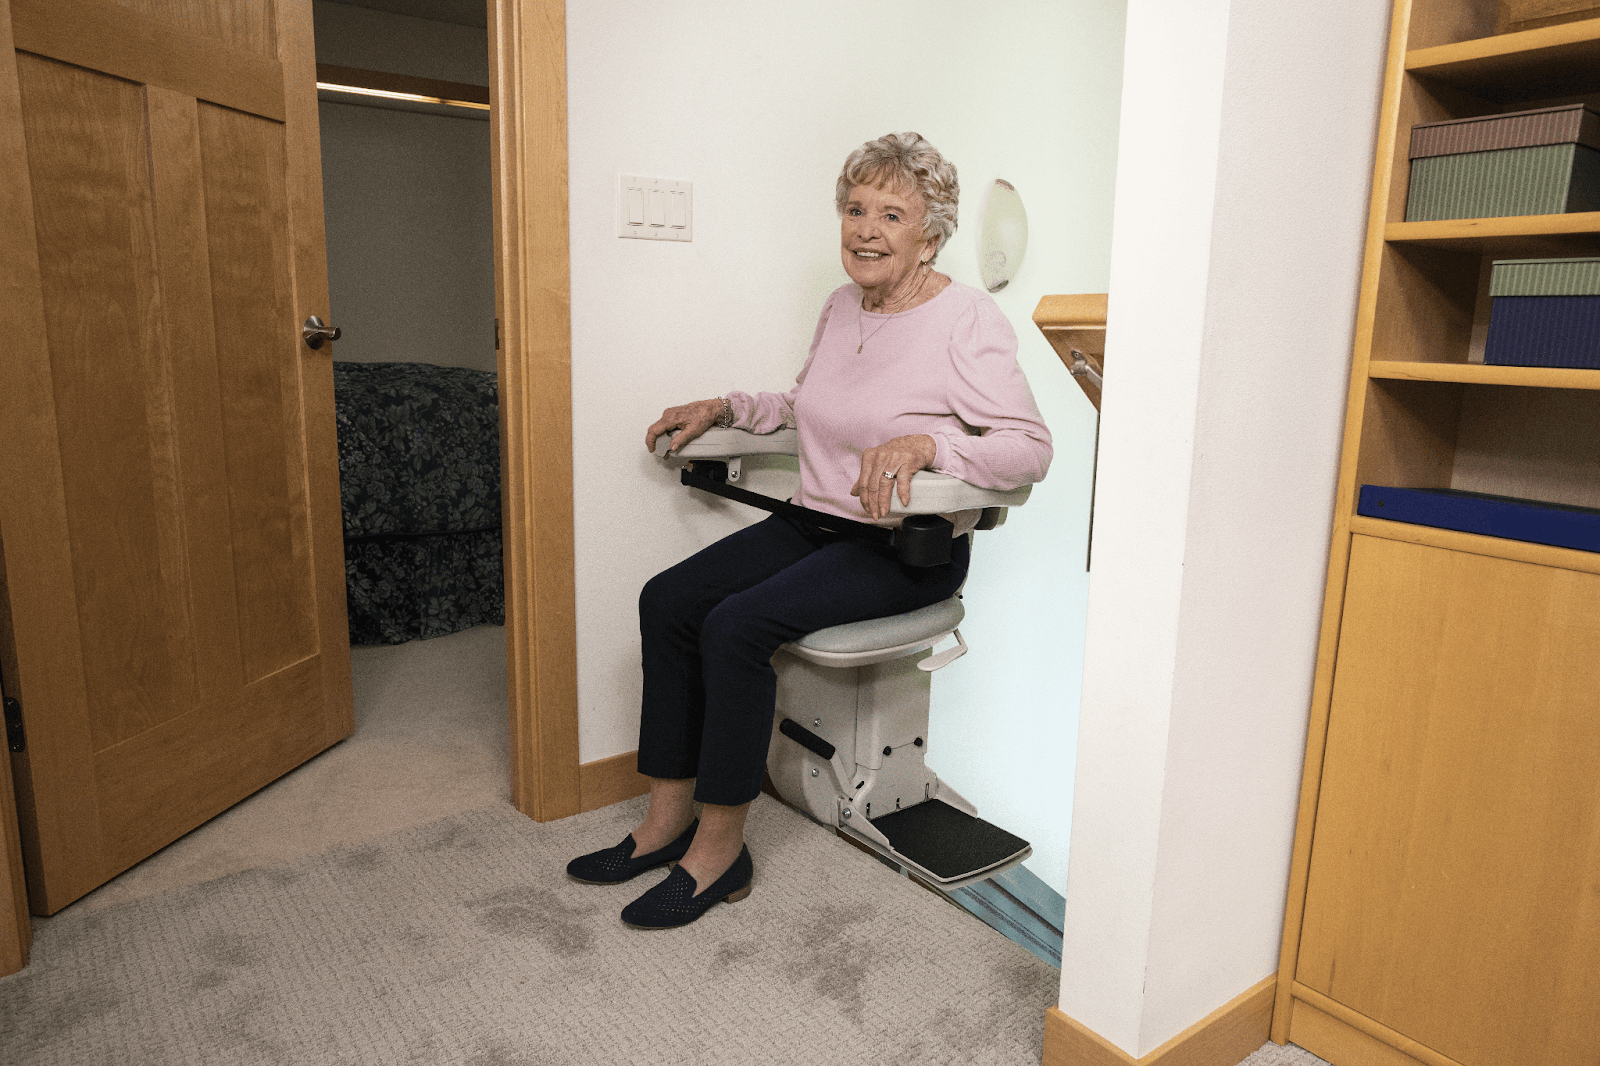 A woman smiling after she just rode up her stair lift